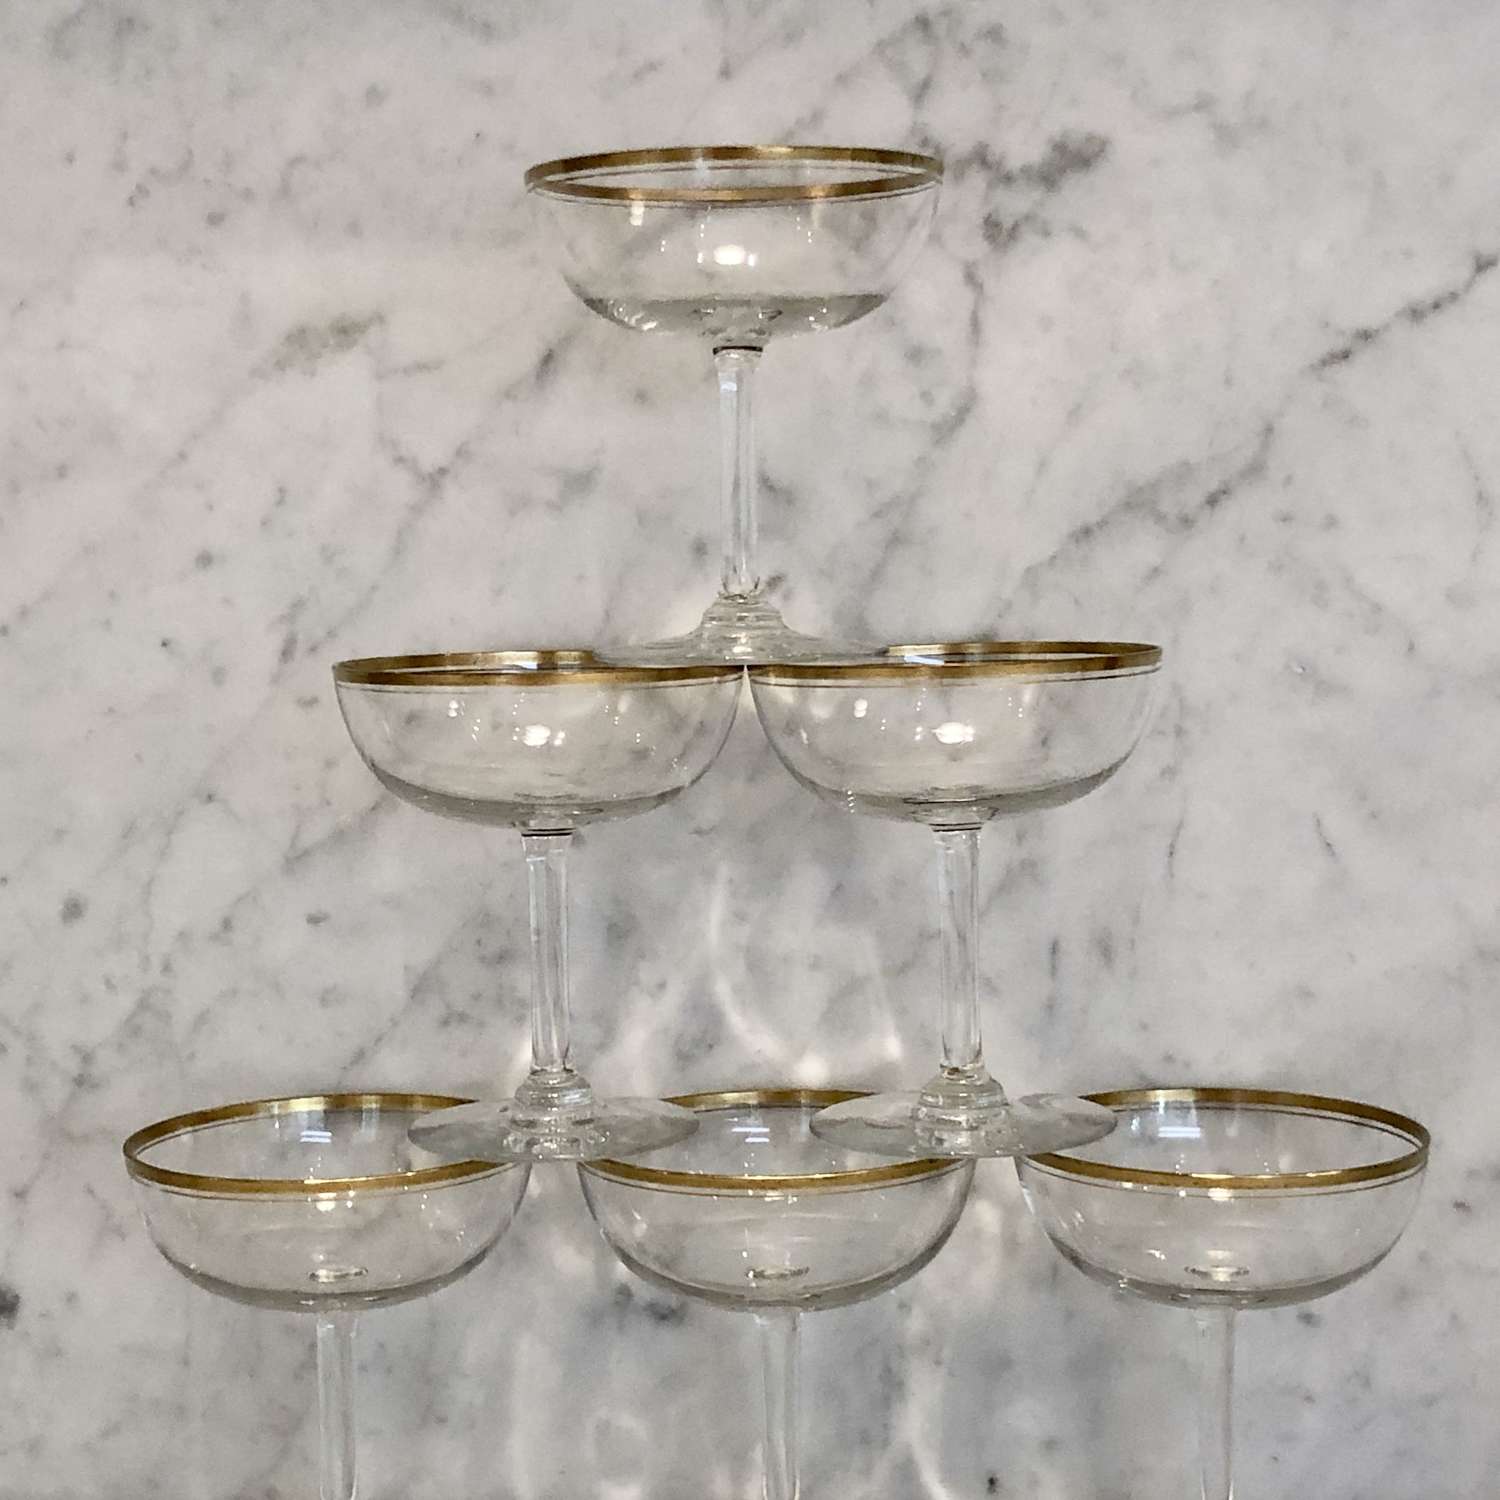 Six French gold rimmed champagne coupes or saucers